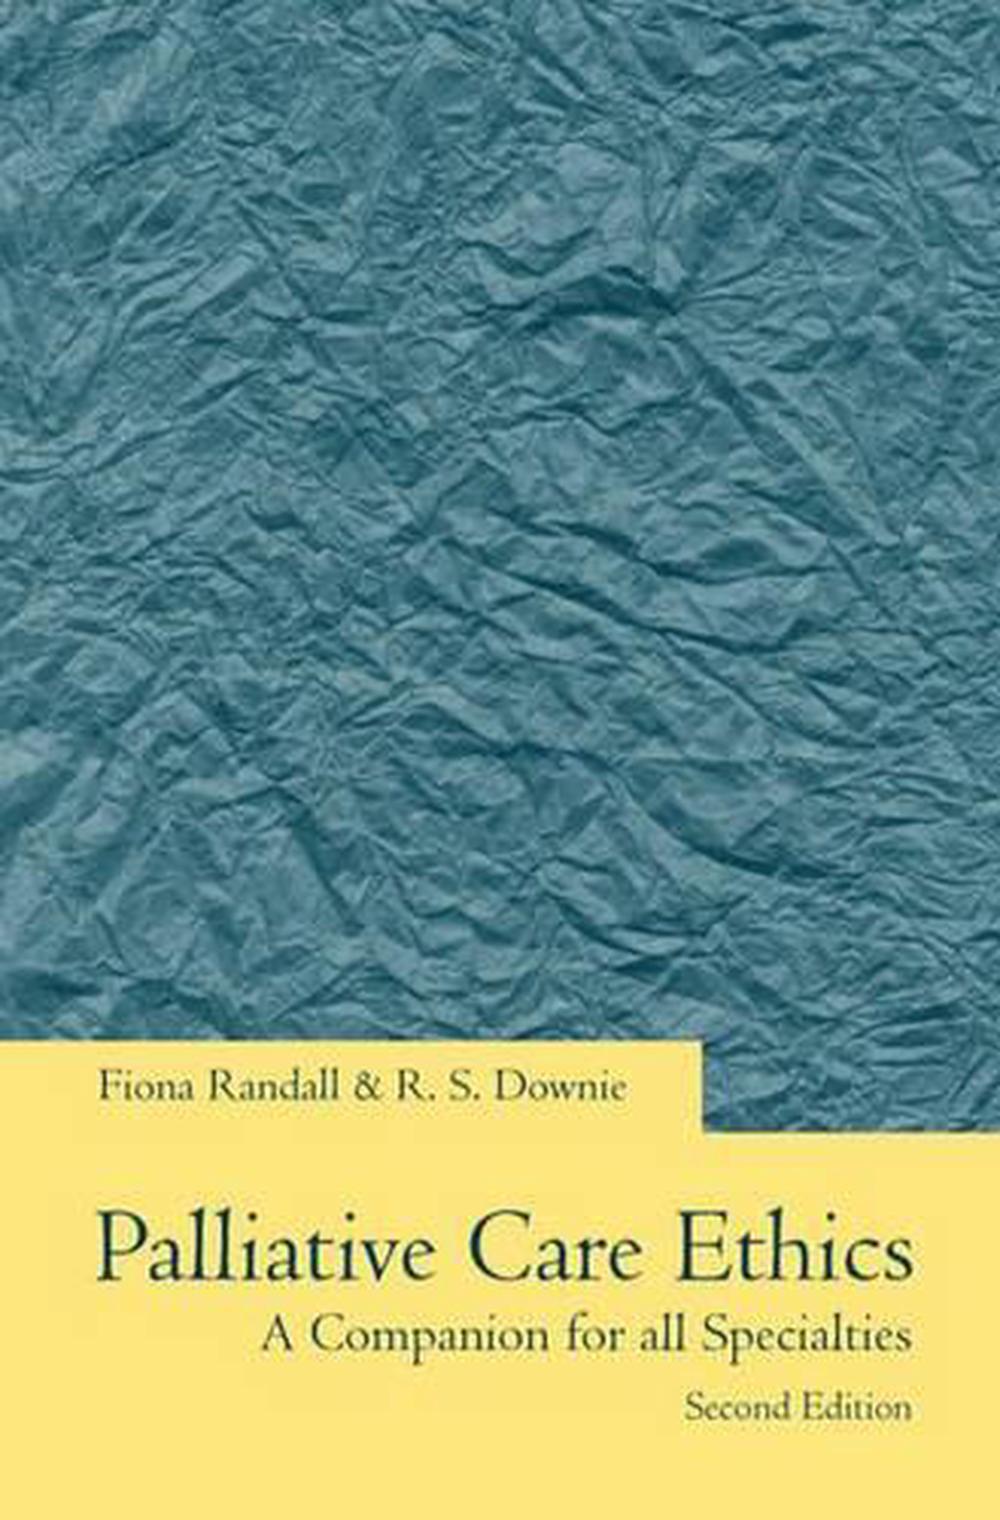 Palliative Care Ethics A Companion for All Specialties by Fiona Randall (Englis 9780192630681